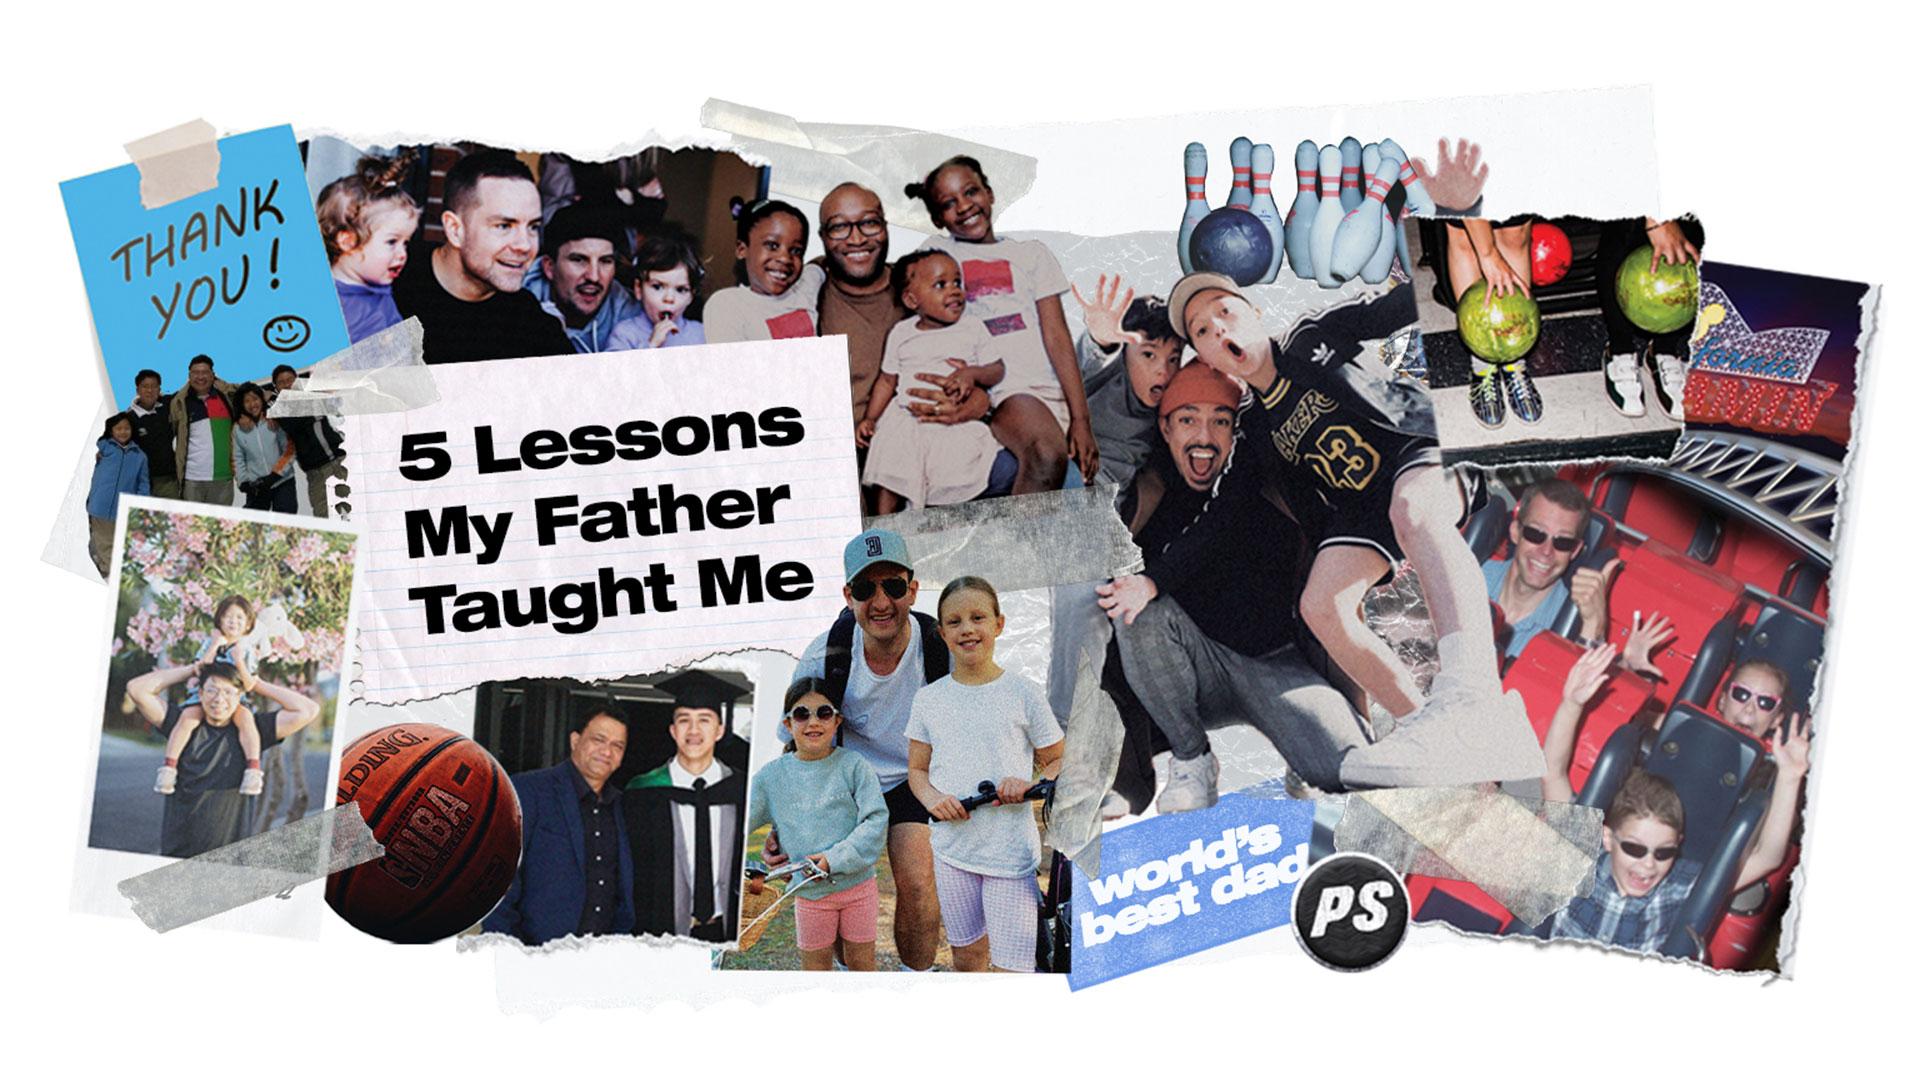 Featured Image for “5 Lessons My Father Taught Me”